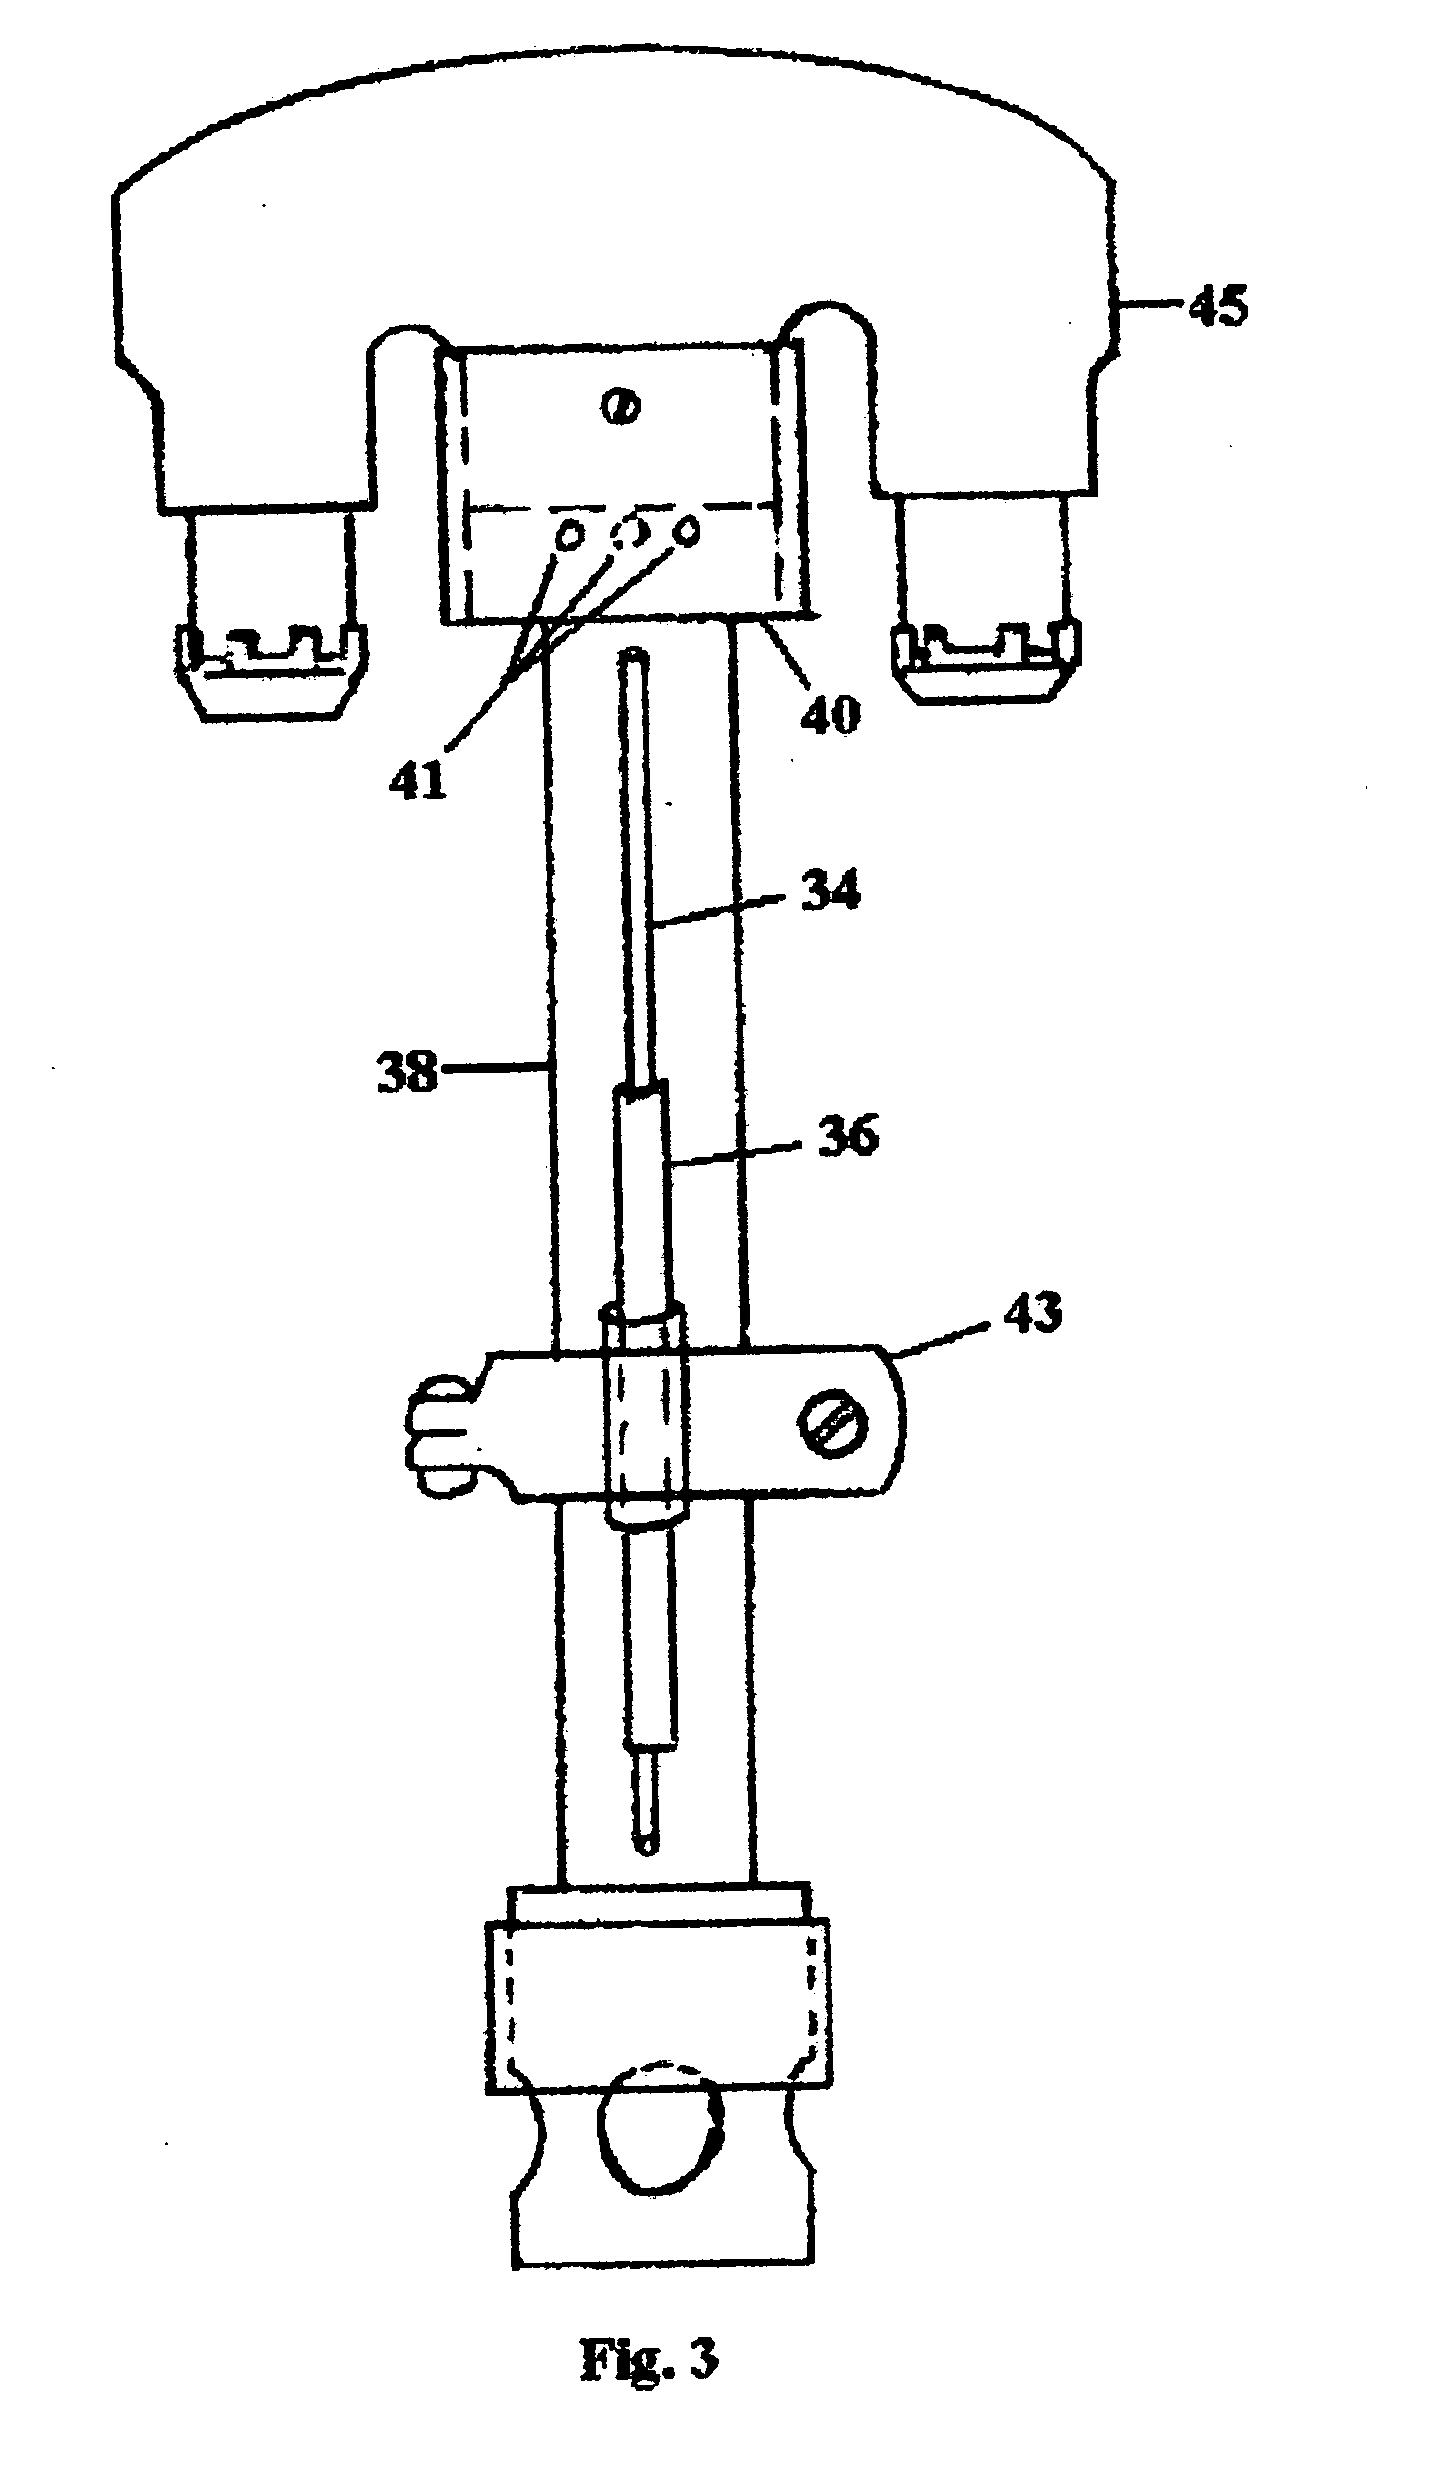 Automatic gaslight igniter/controller and burners